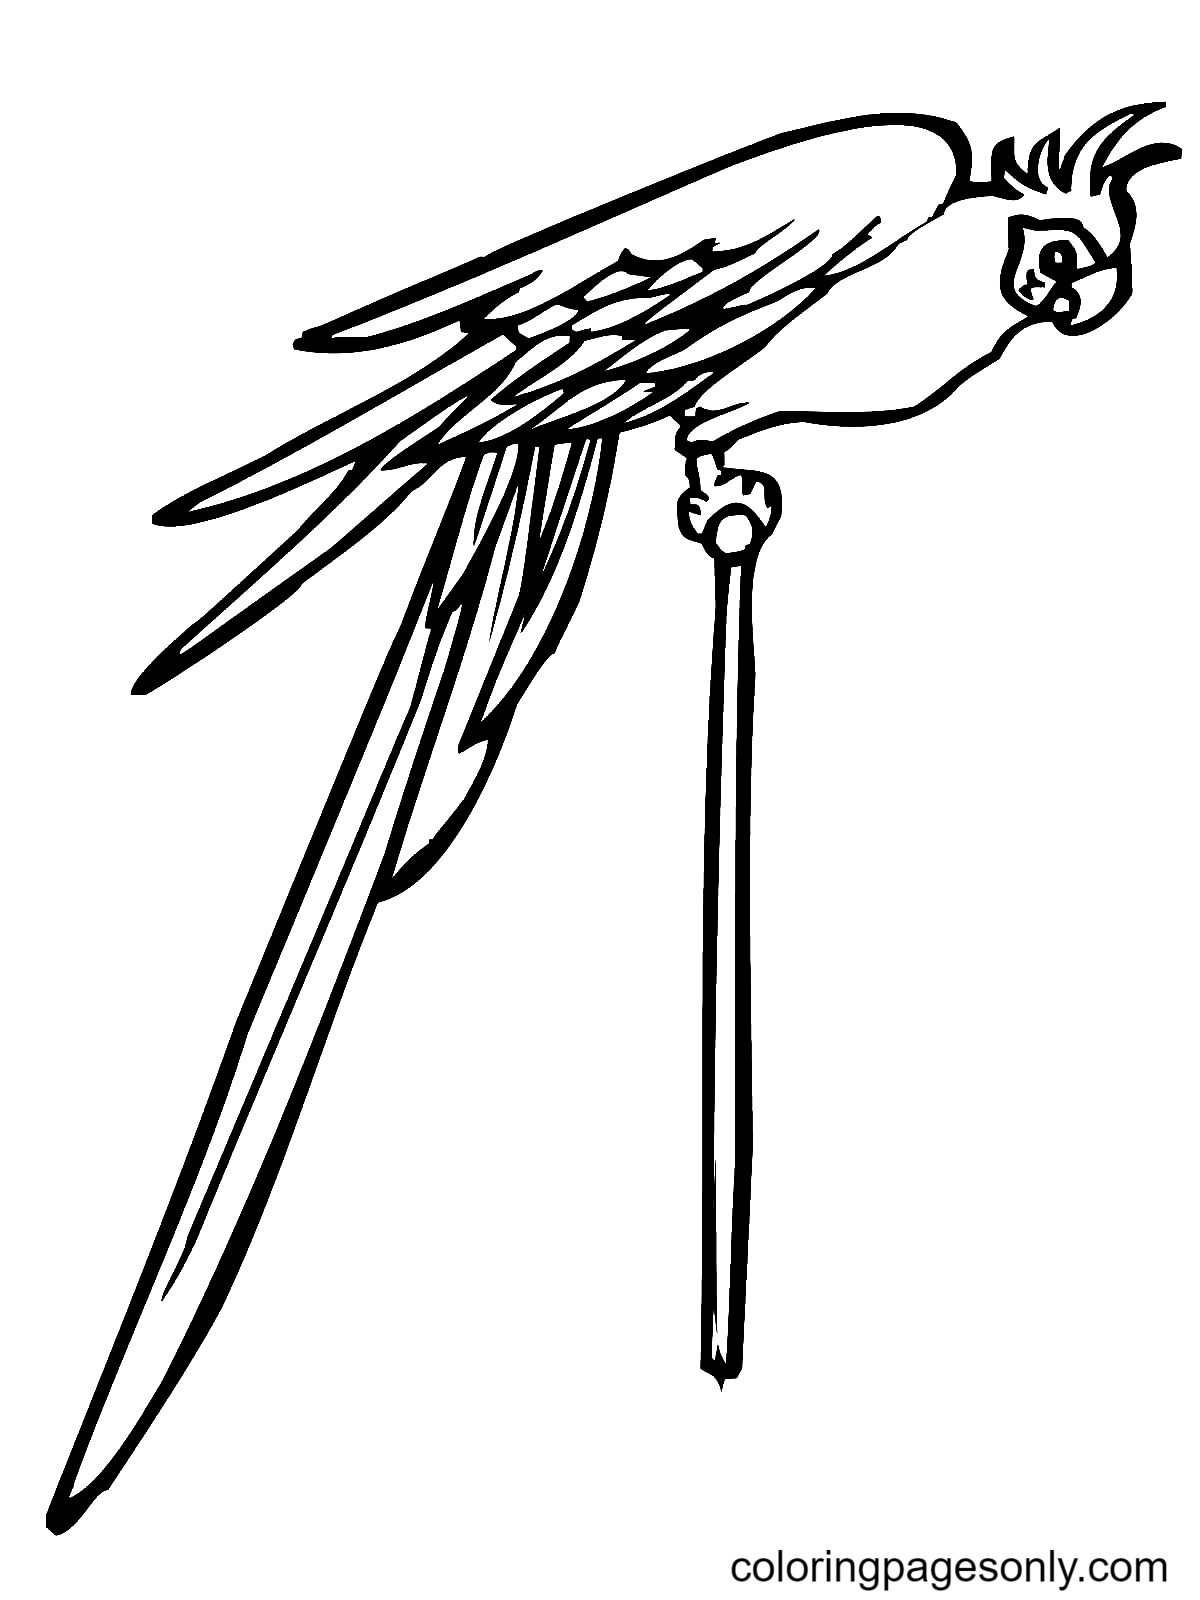 Parakeet On A Pole Coloring Pages